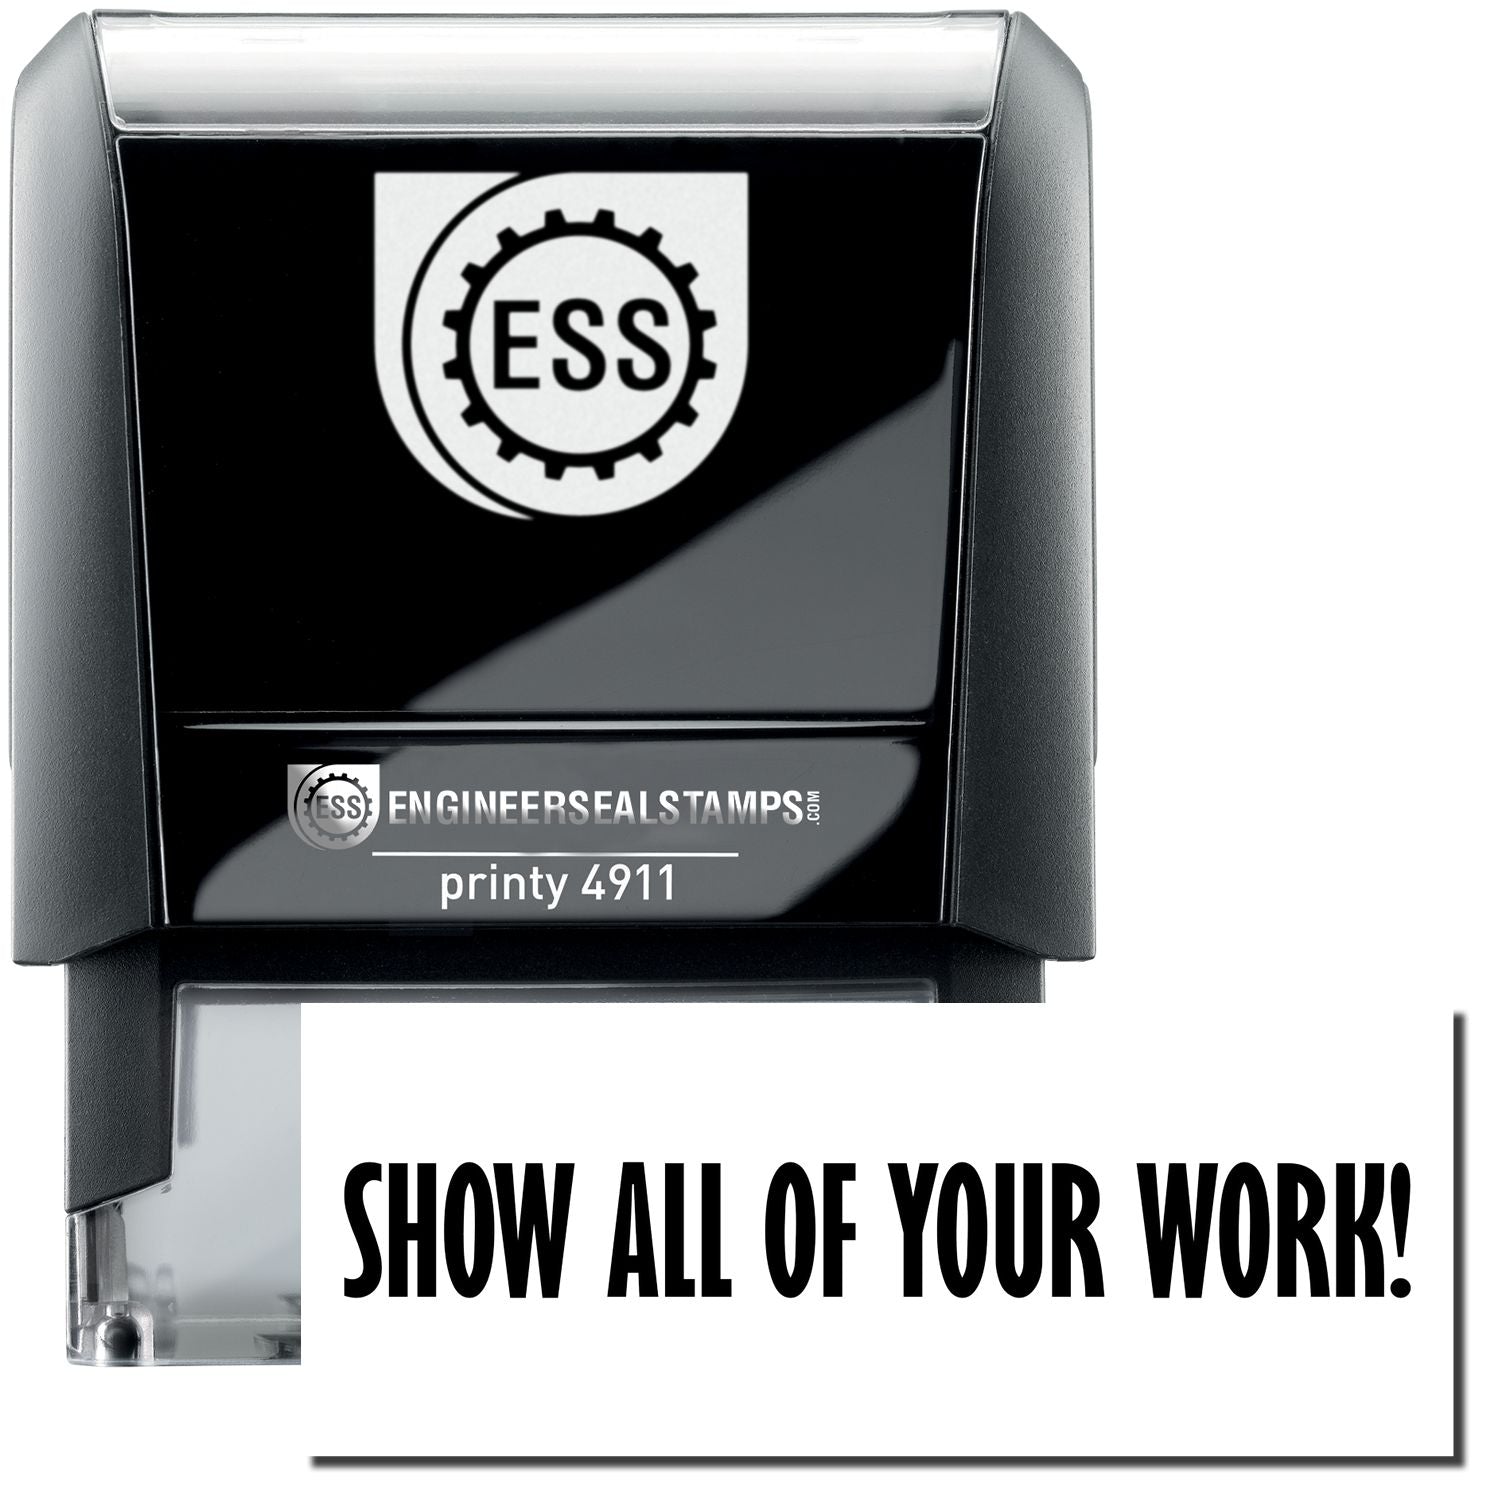 A self-inking stamp with a stamped image showing how the text "SHOW ALL OF YOUR WORK!" is displayed after stamping.